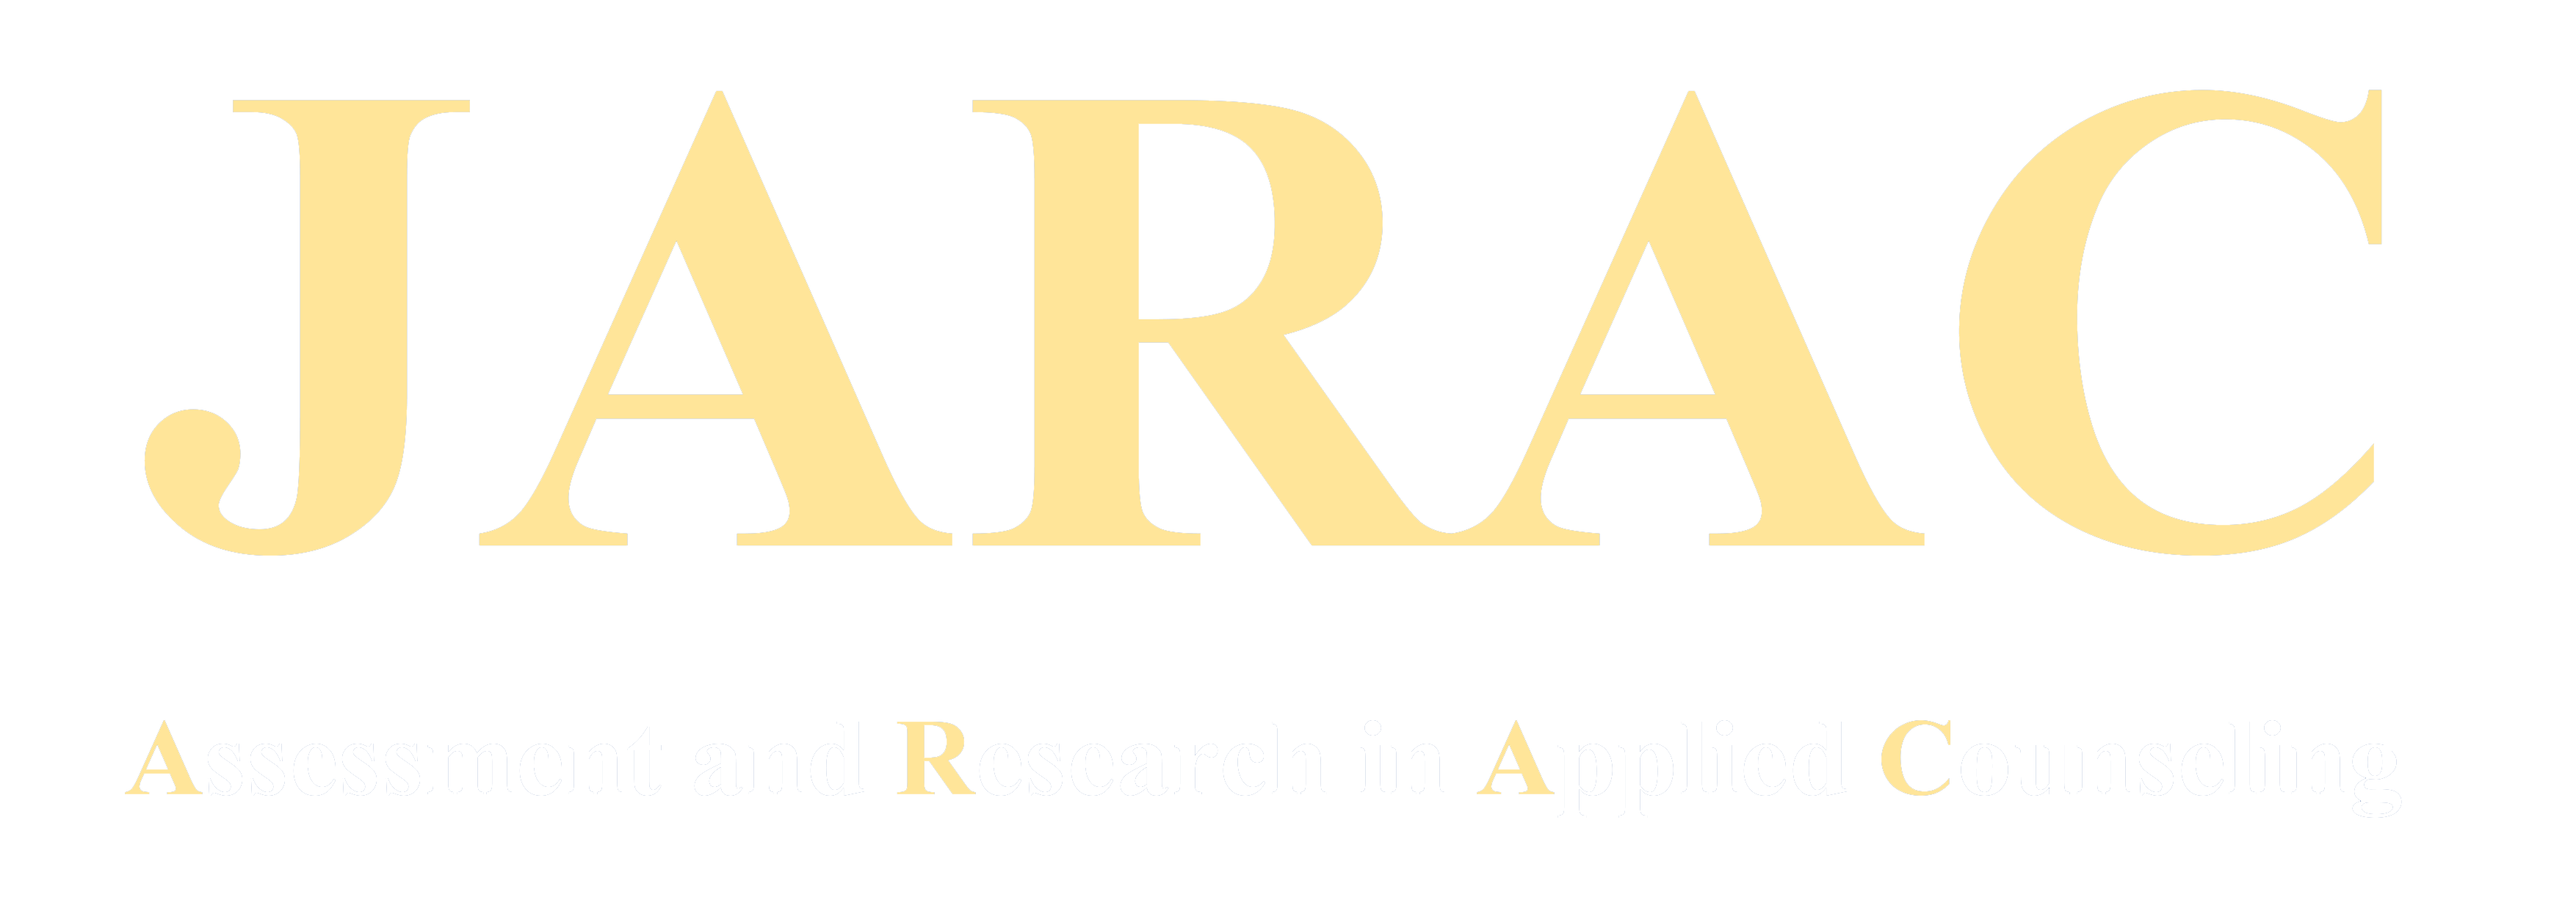 Journal of Assessment and Research in Applied Counseling (JARAC)